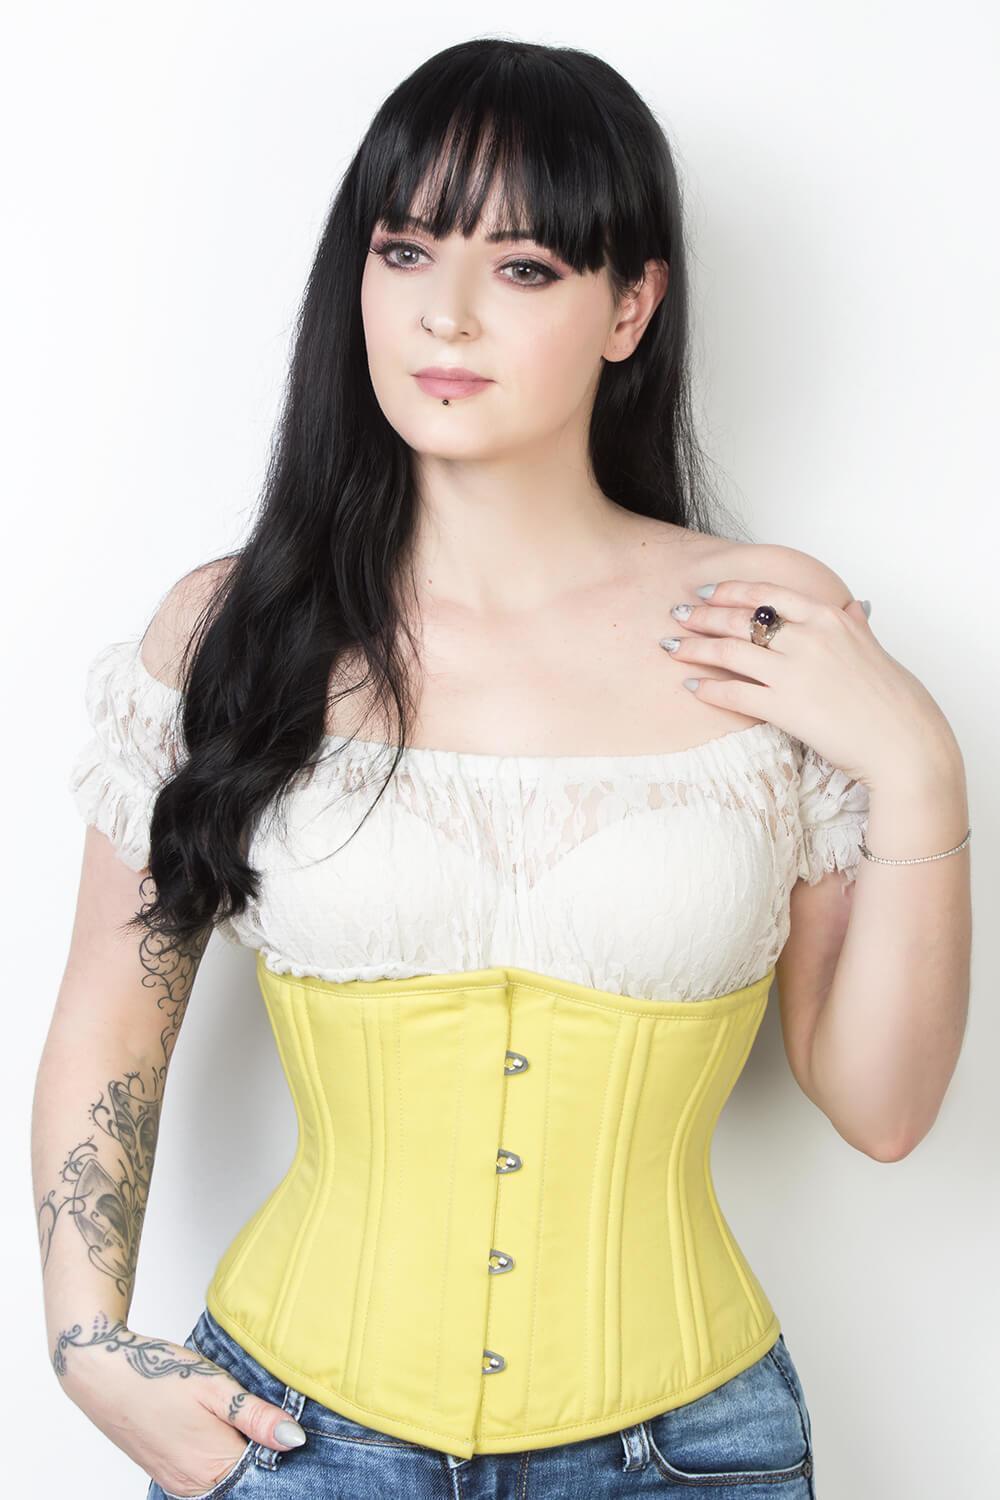 Grab best deals on Custom Made Corsets and Cotton Corset here